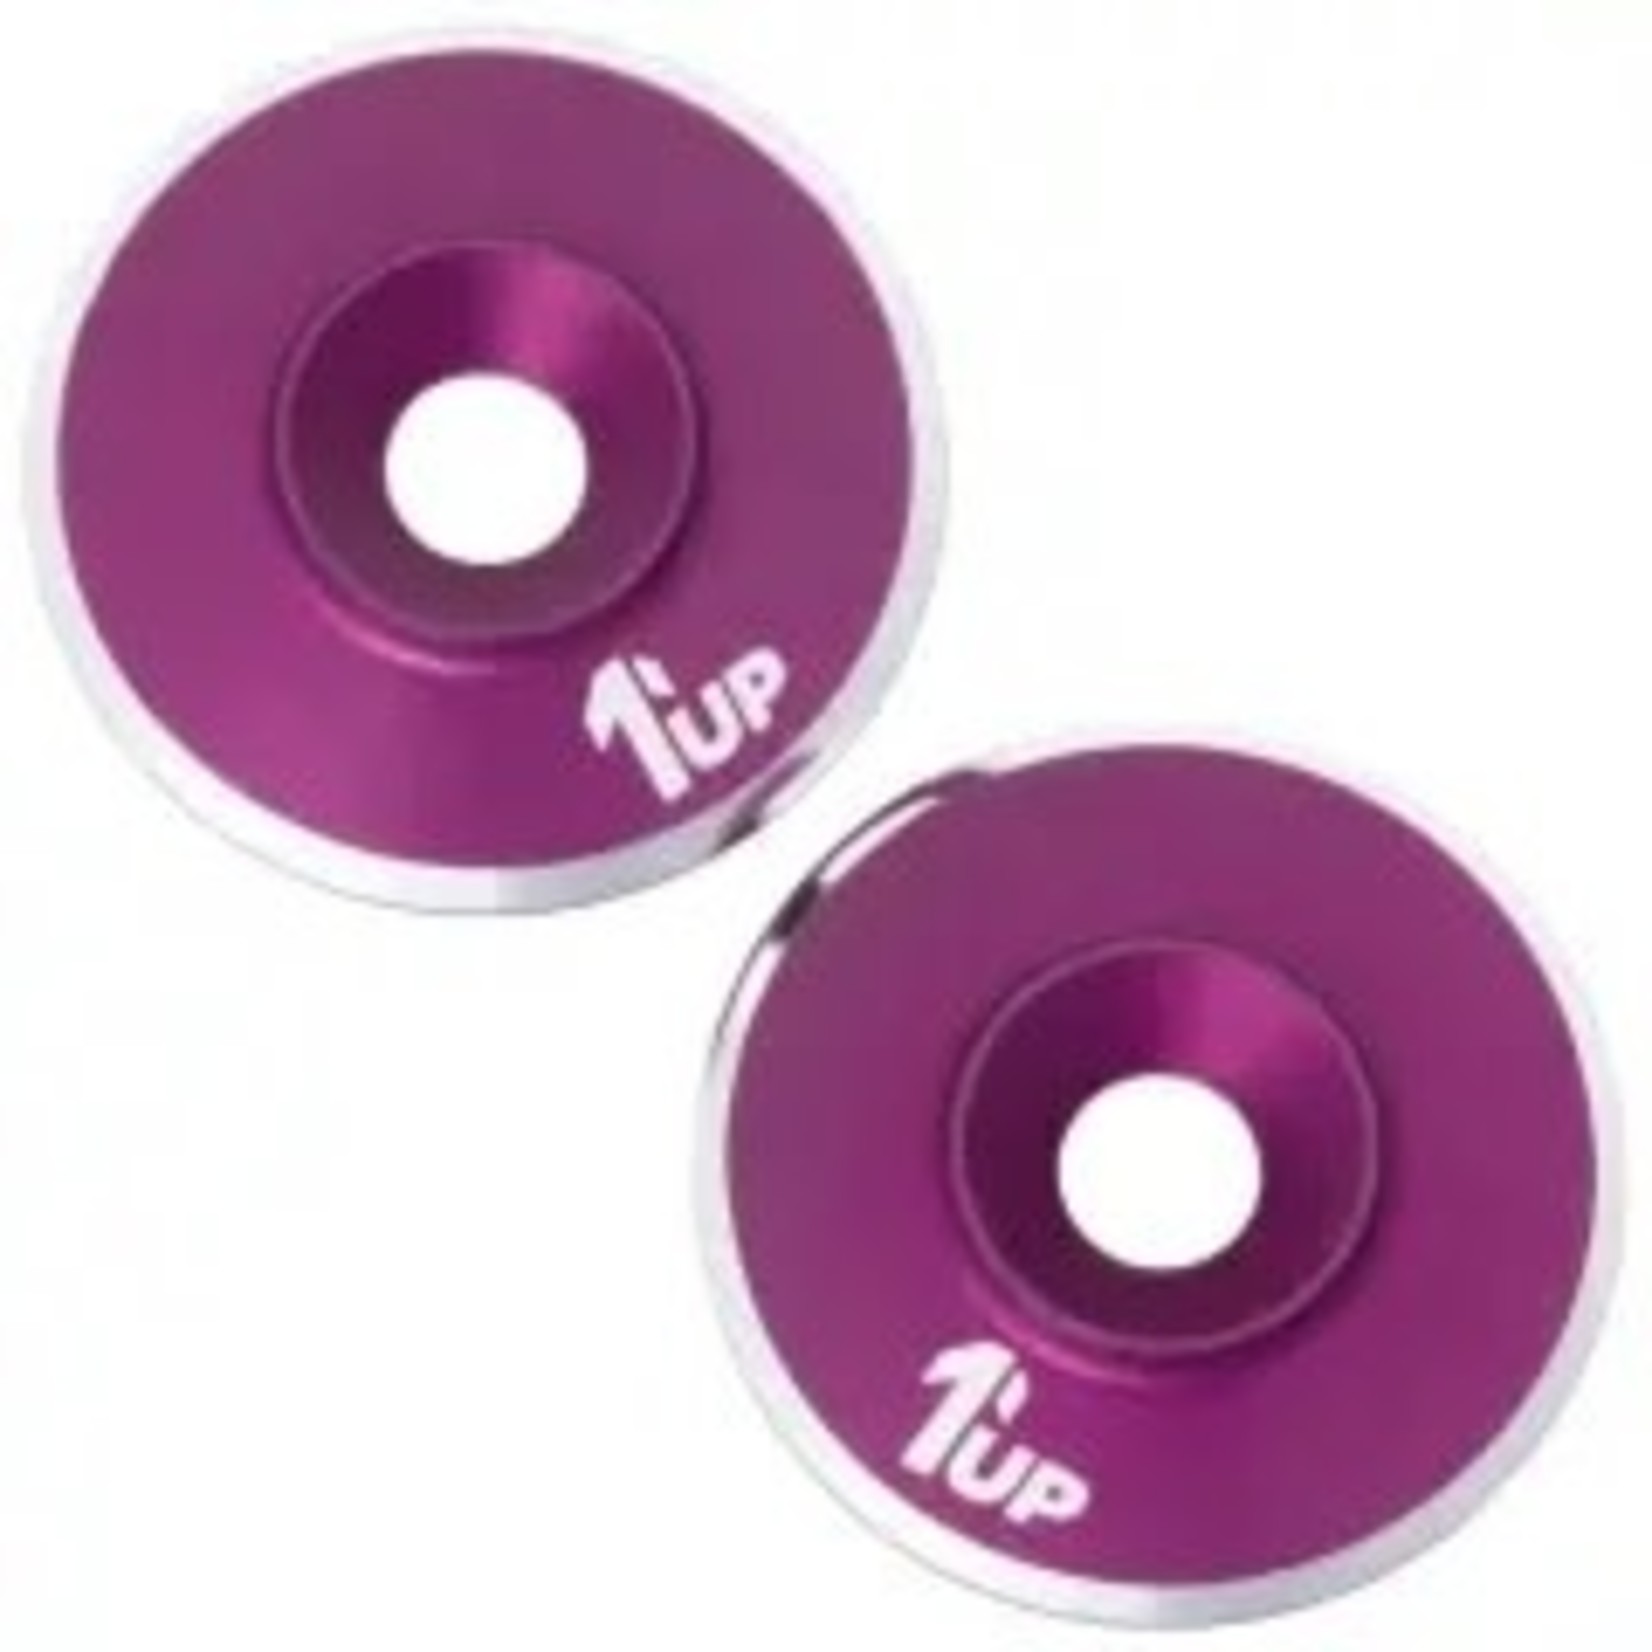 1UP 1UP820321 1Up Racing 7075 LowPro Wing Washers - M3 - 2pcs - Purple Shine